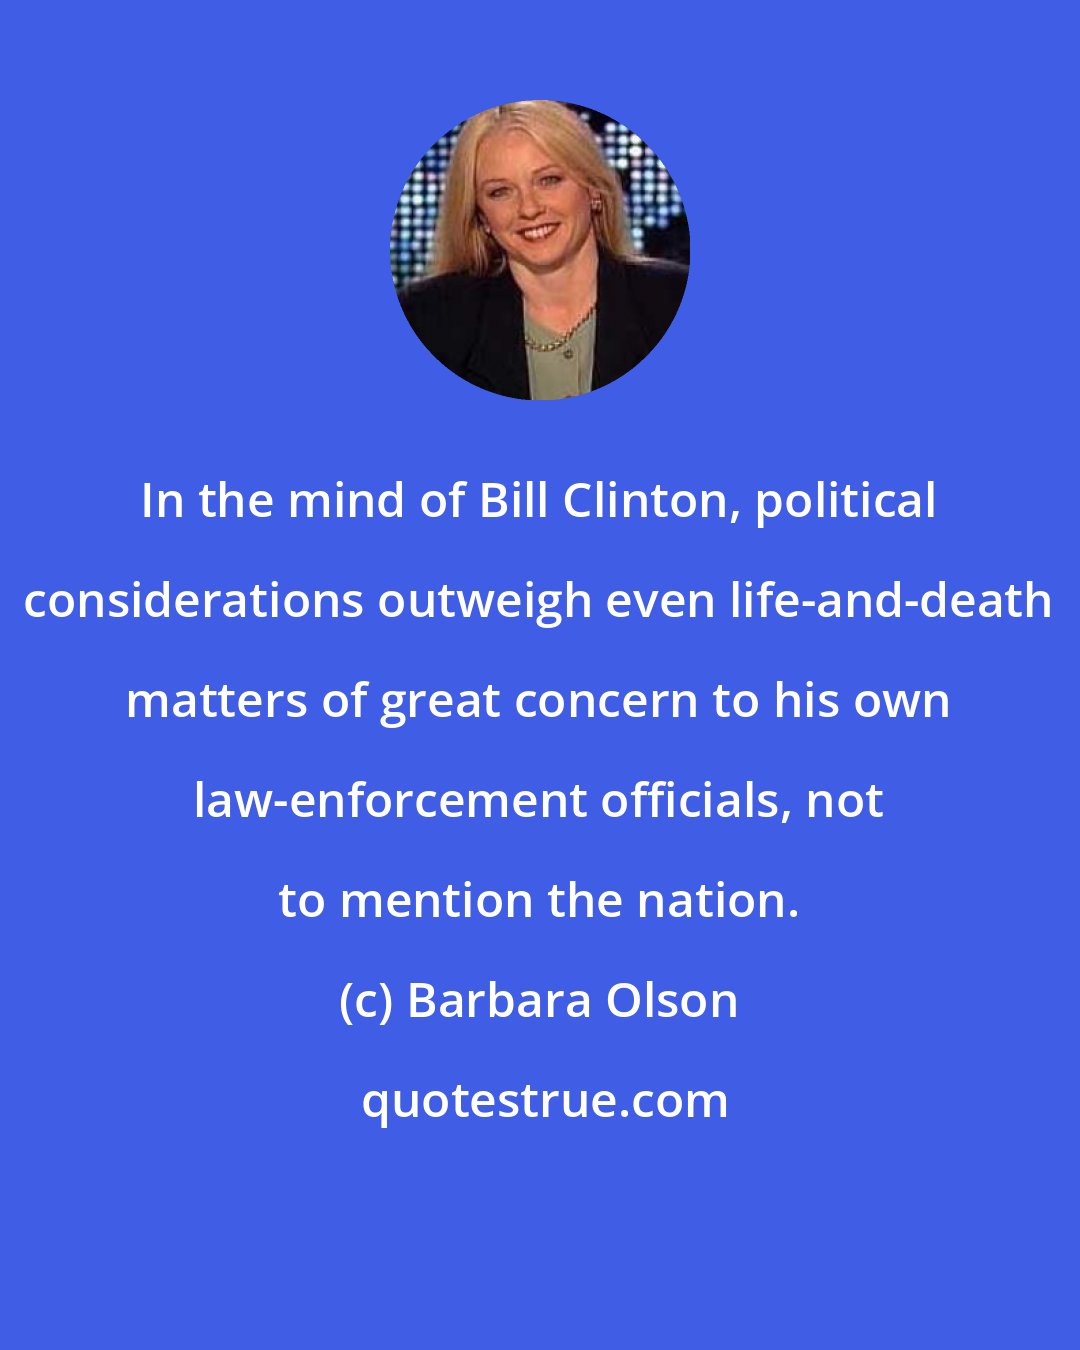 Barbara Olson: In the mind of Bill Clinton, political considerations outweigh even life-and-death matters of great concern to his own law-enforcement officials, not to mention the nation.